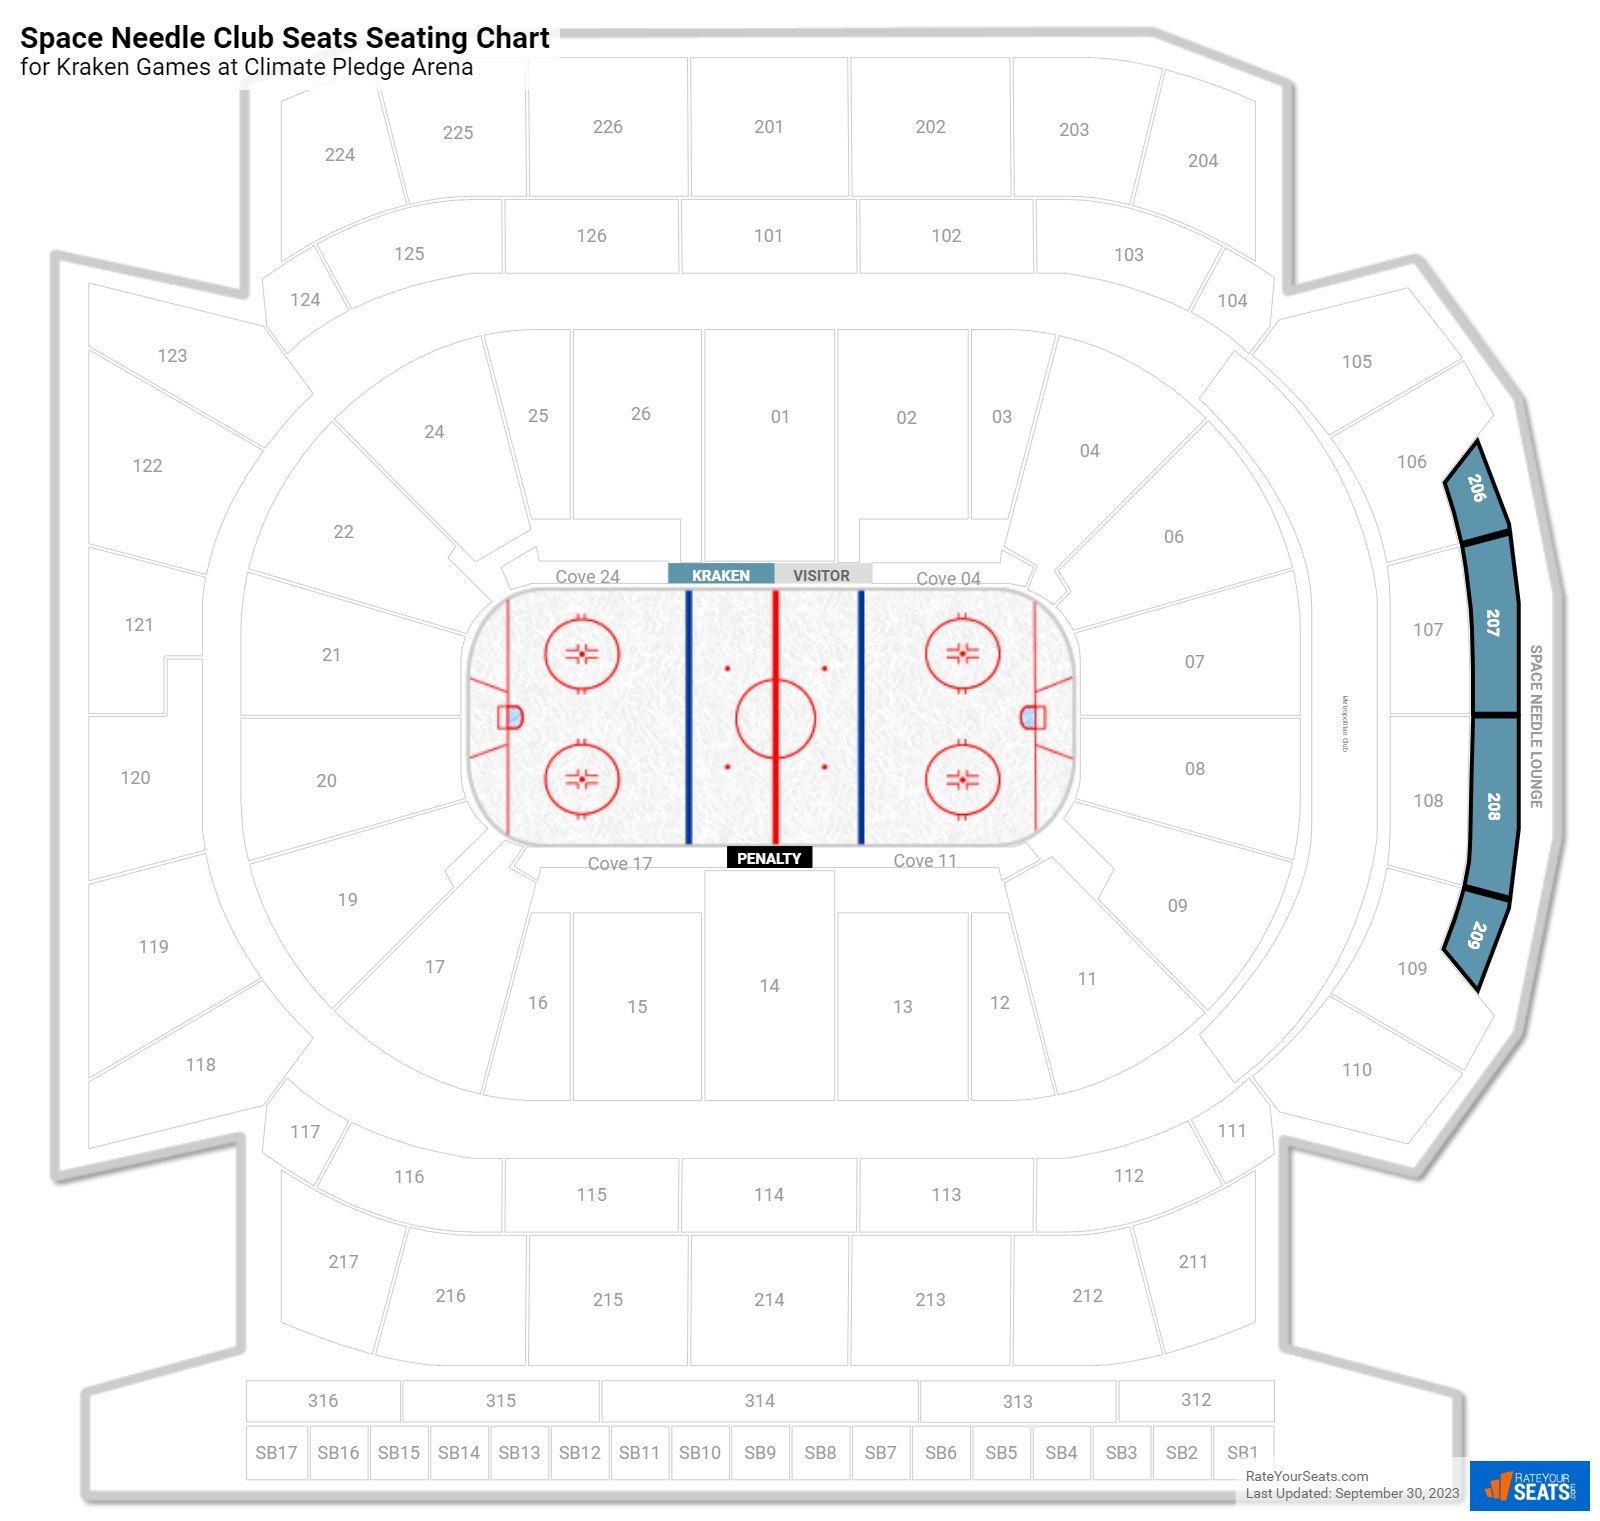 Kraken Space Needle Club Seats Seating Chart at Climate Pledge Arena